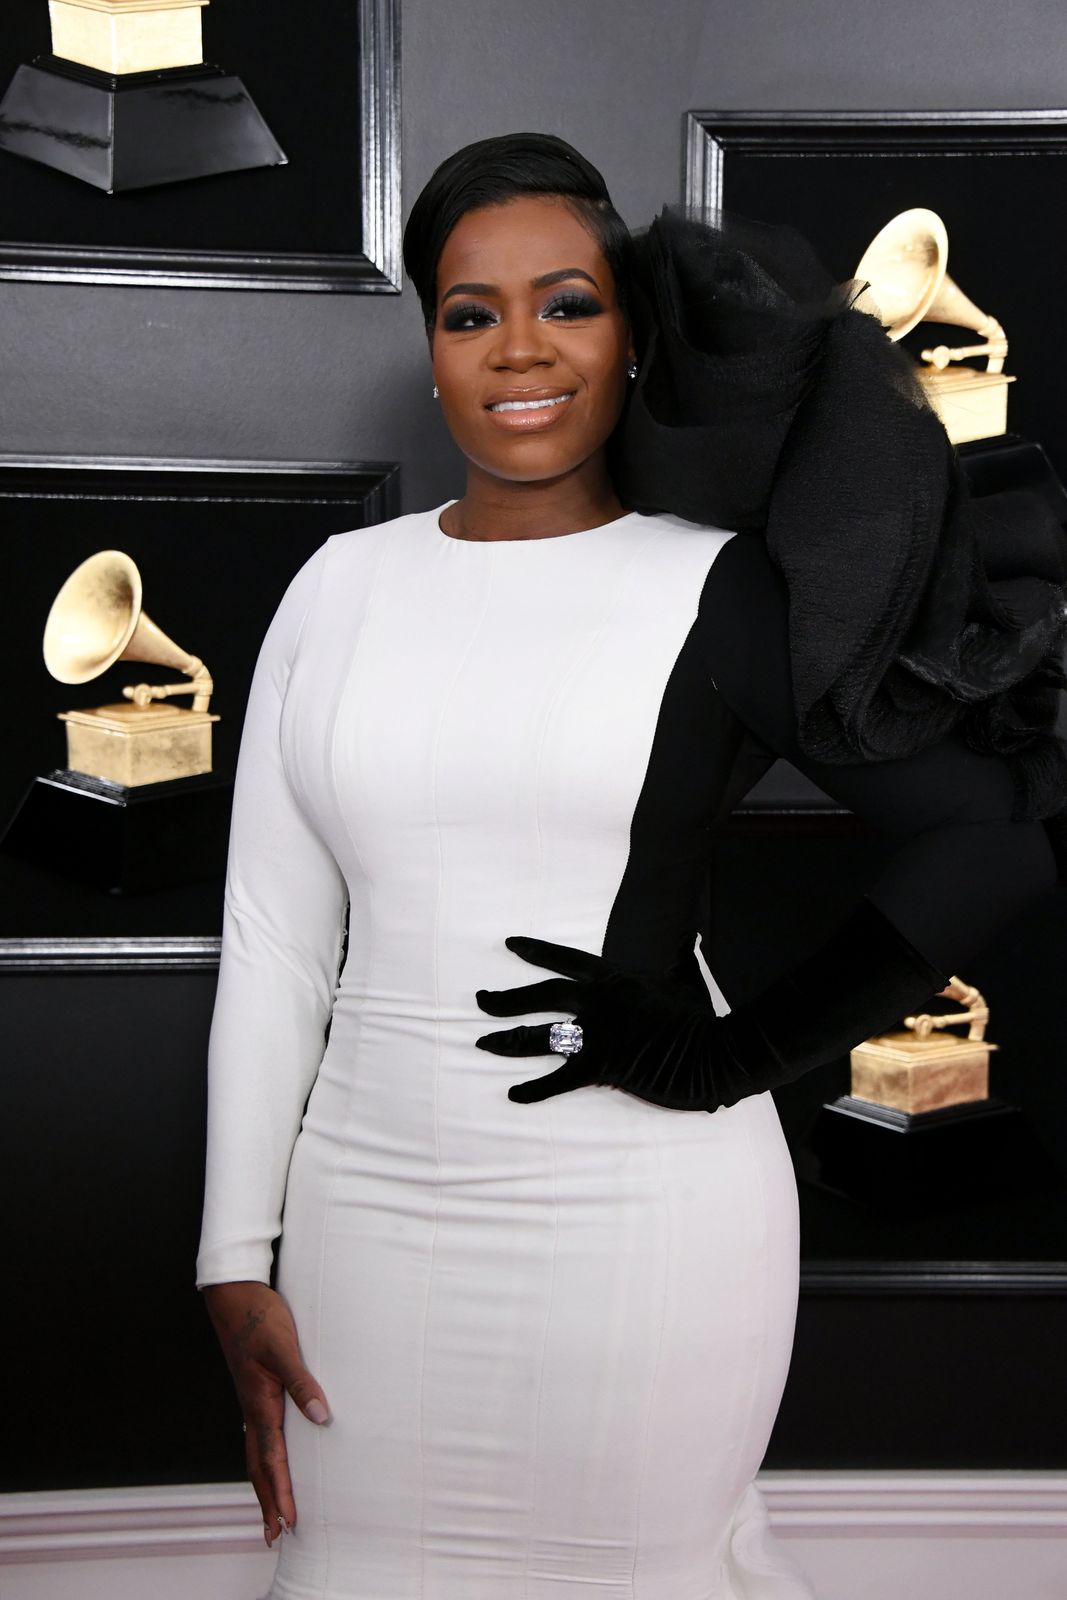 Fantasia Barrino at the 61st Annual Grammy Awards at Staples Center on February 10, 2019 | Photo: Getty Images